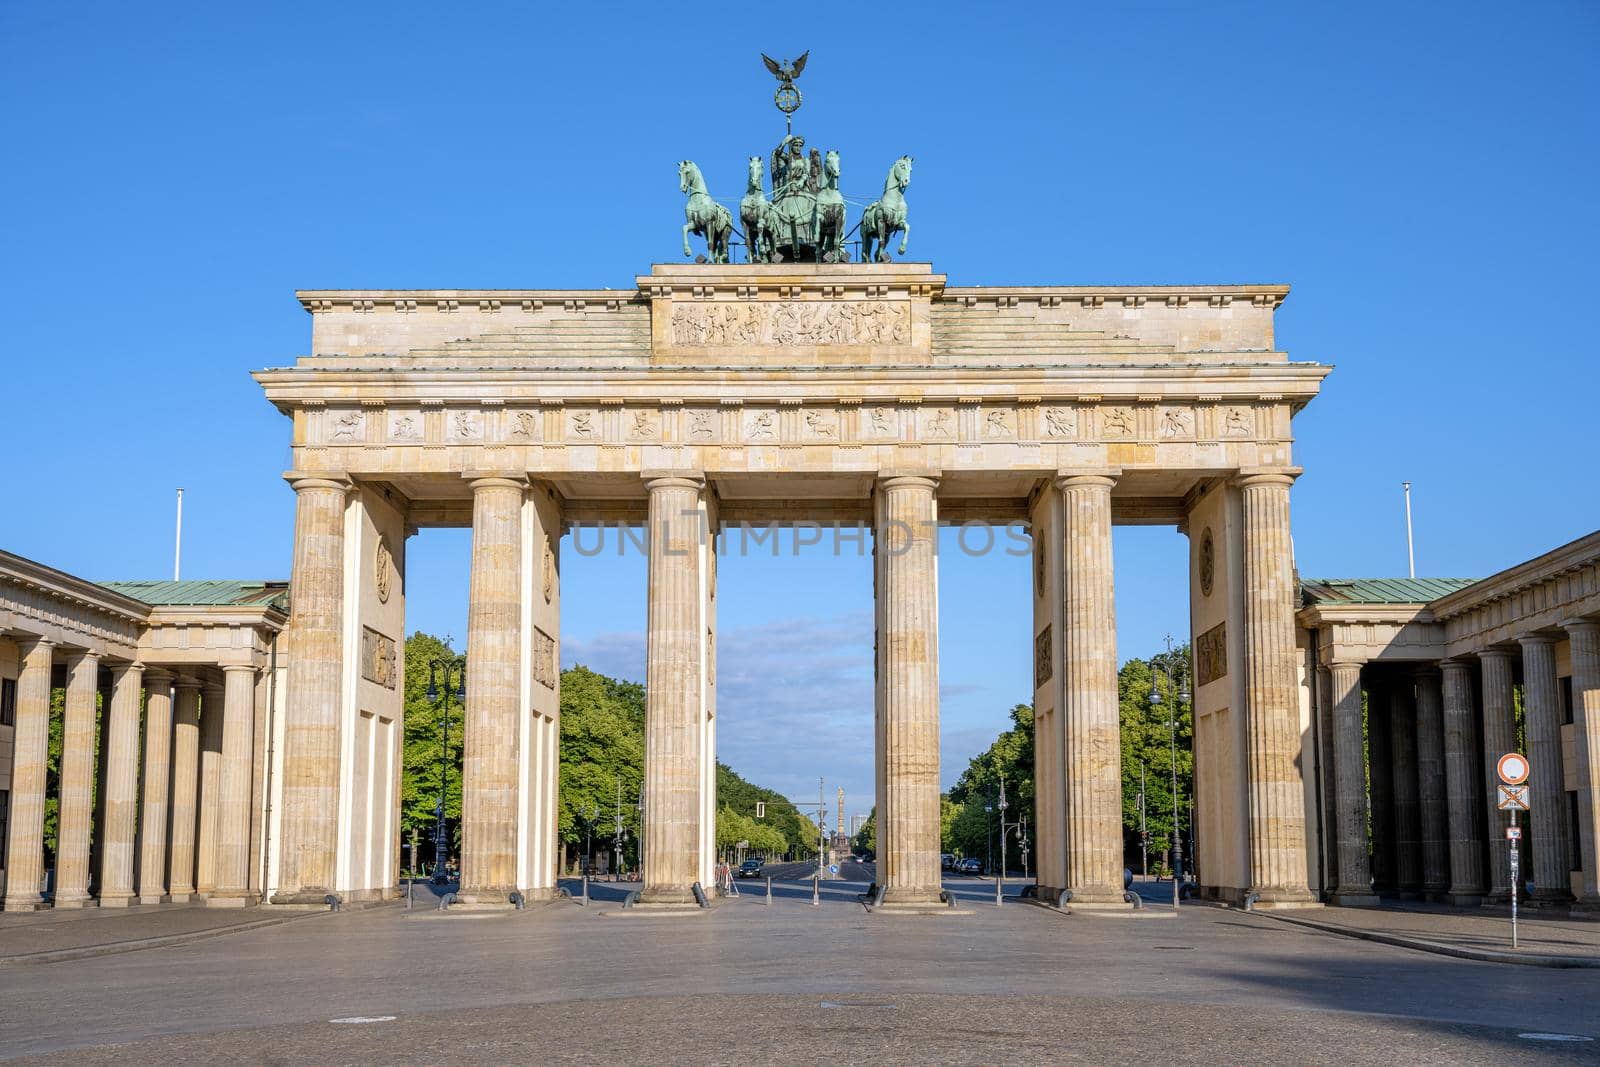 The Brandenburg Gate in Berlin early in the morning with no people